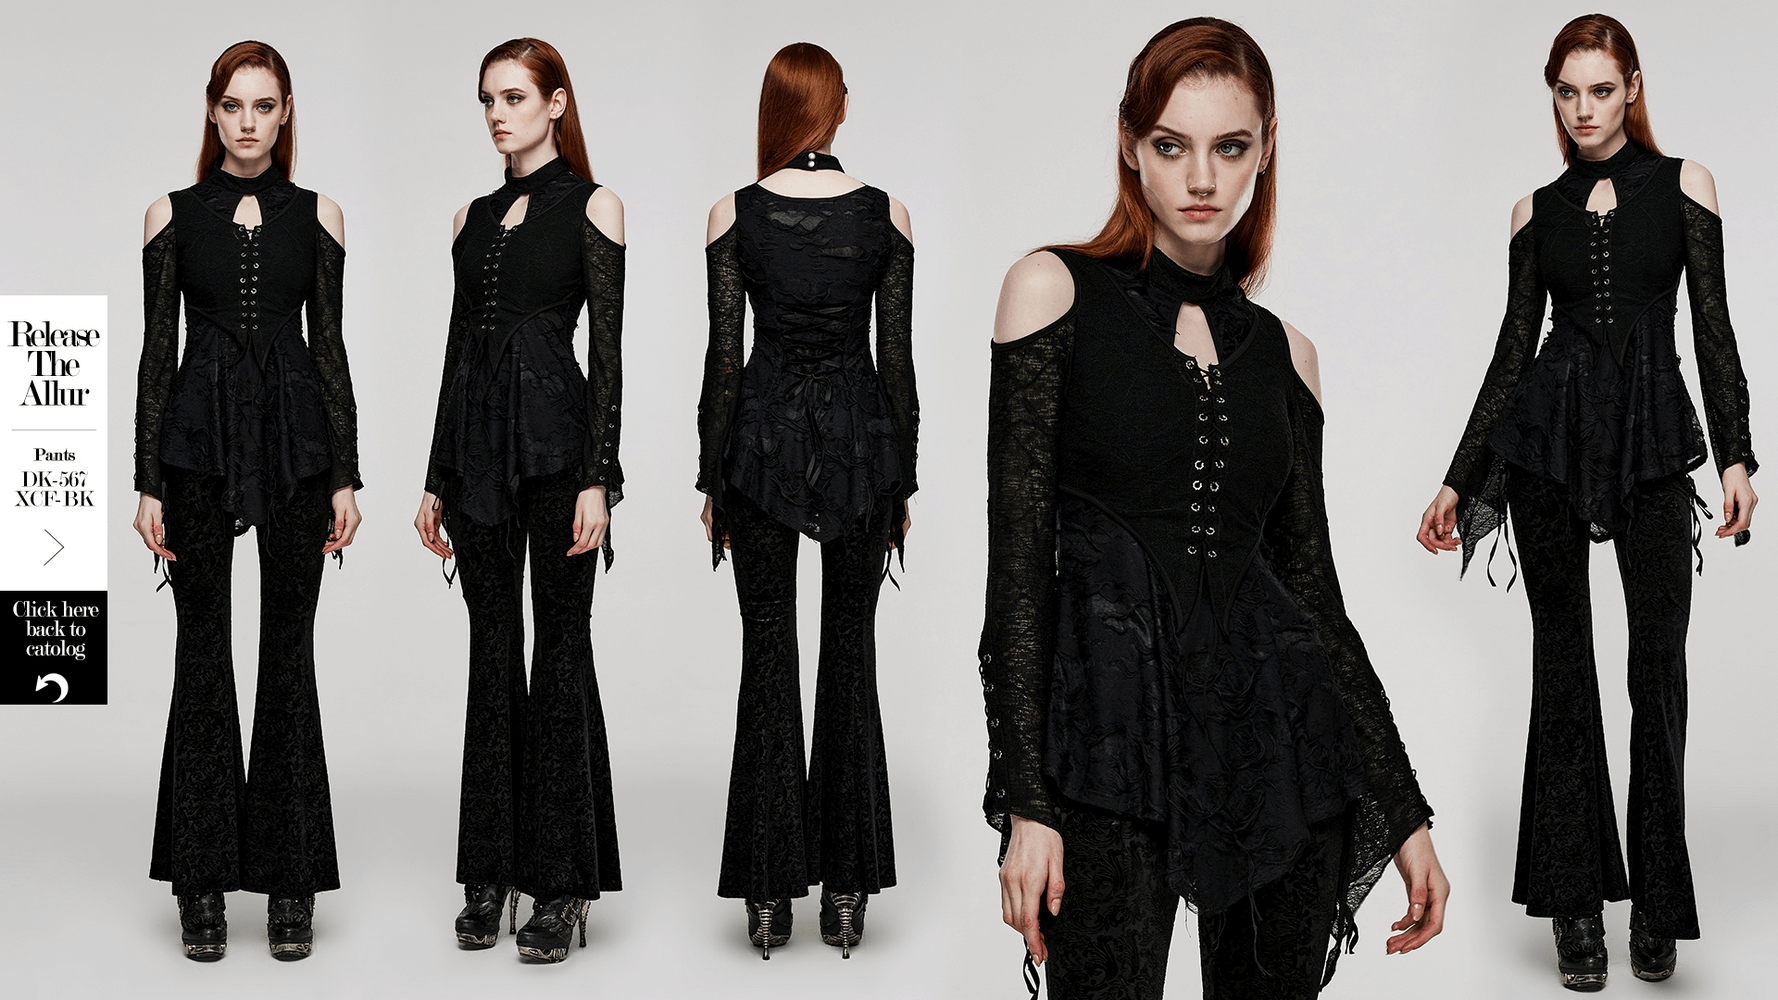 Textured Lace Top with Adjustable Front Panel - Punk Rave - HARD'N'HEAVY